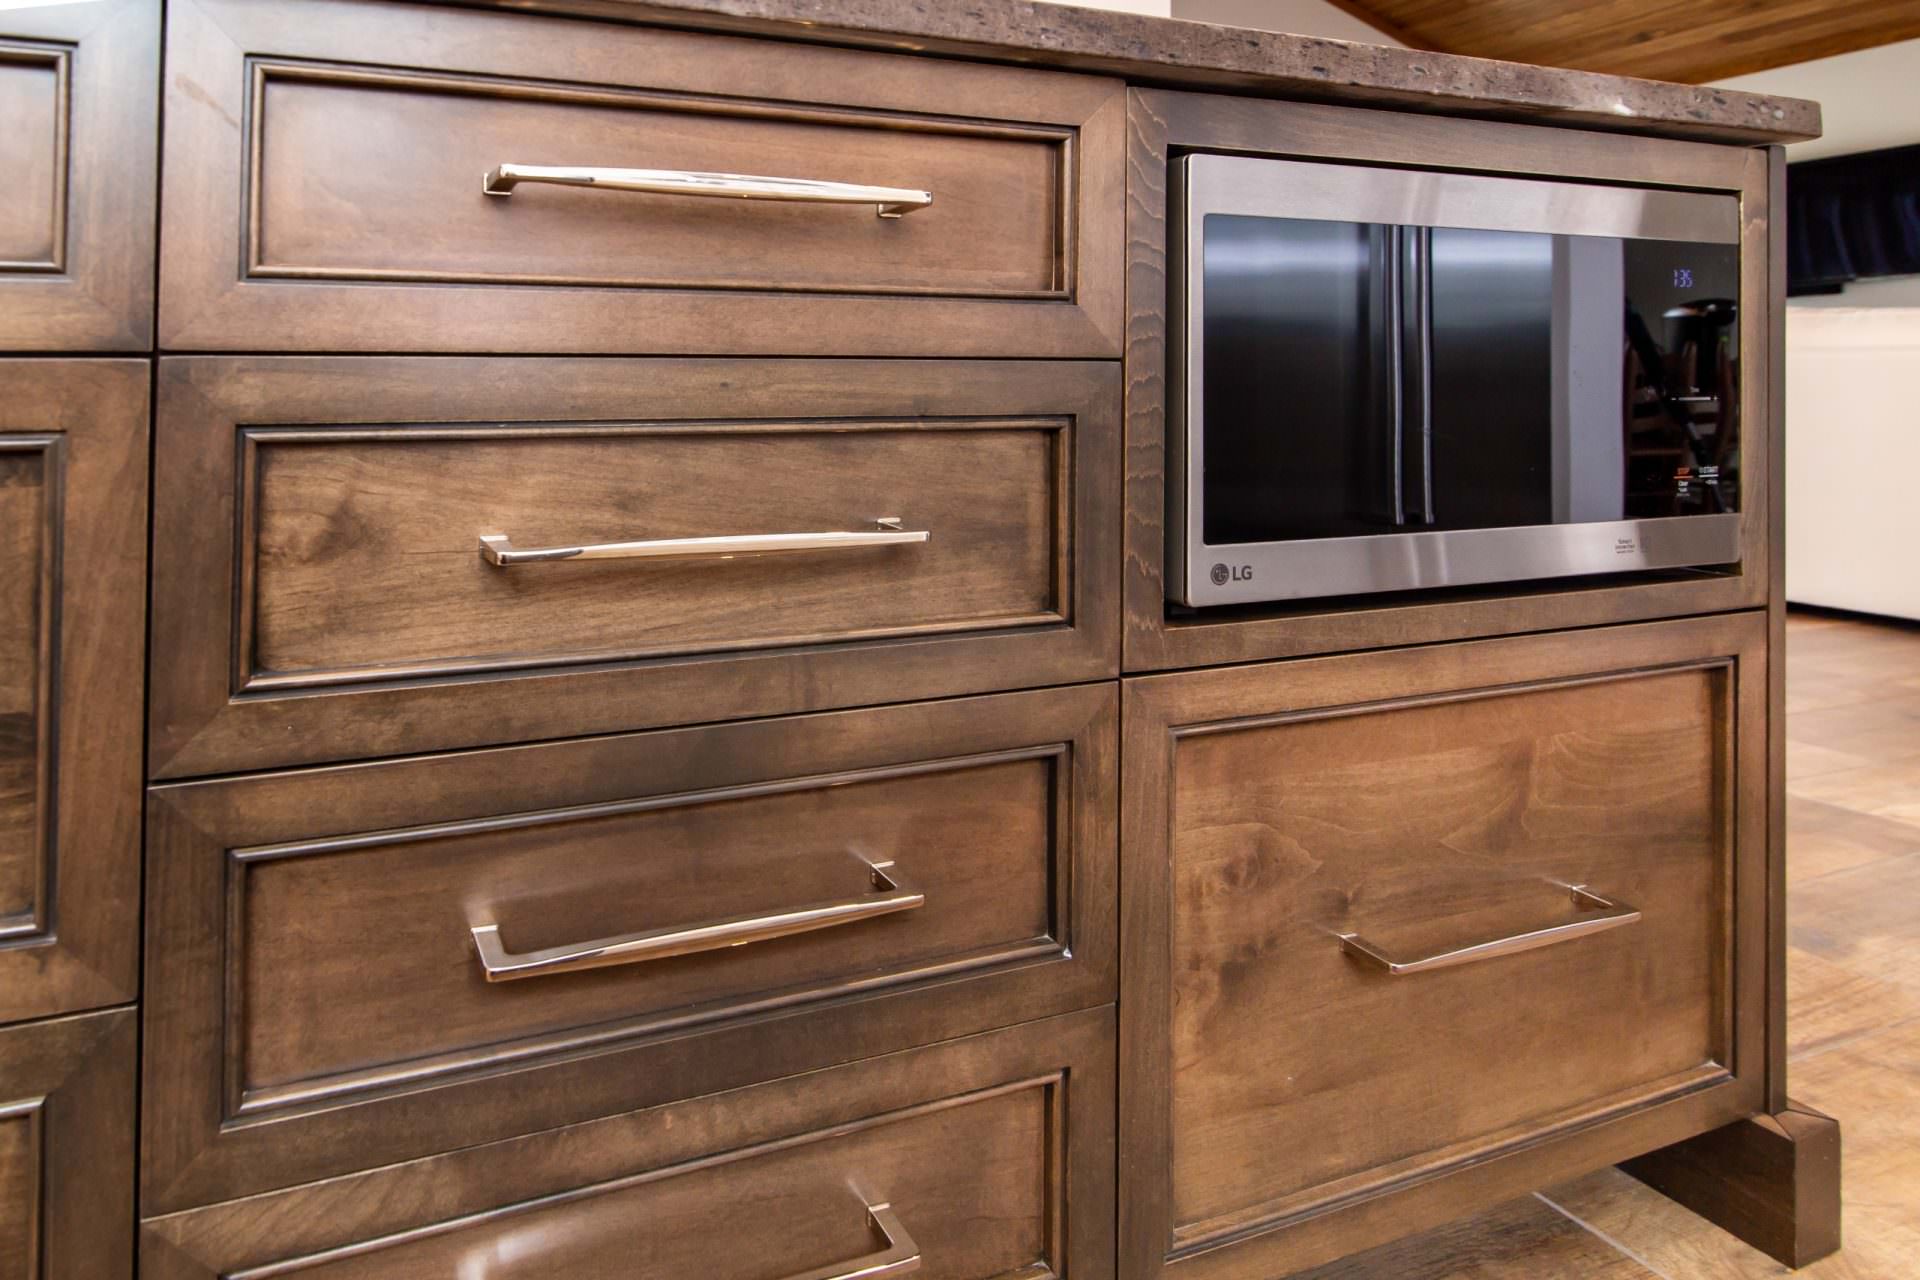 Are Natural Wood Cabinets Out Of Style, Are Maple Kitchen Cabinets Out Of Style